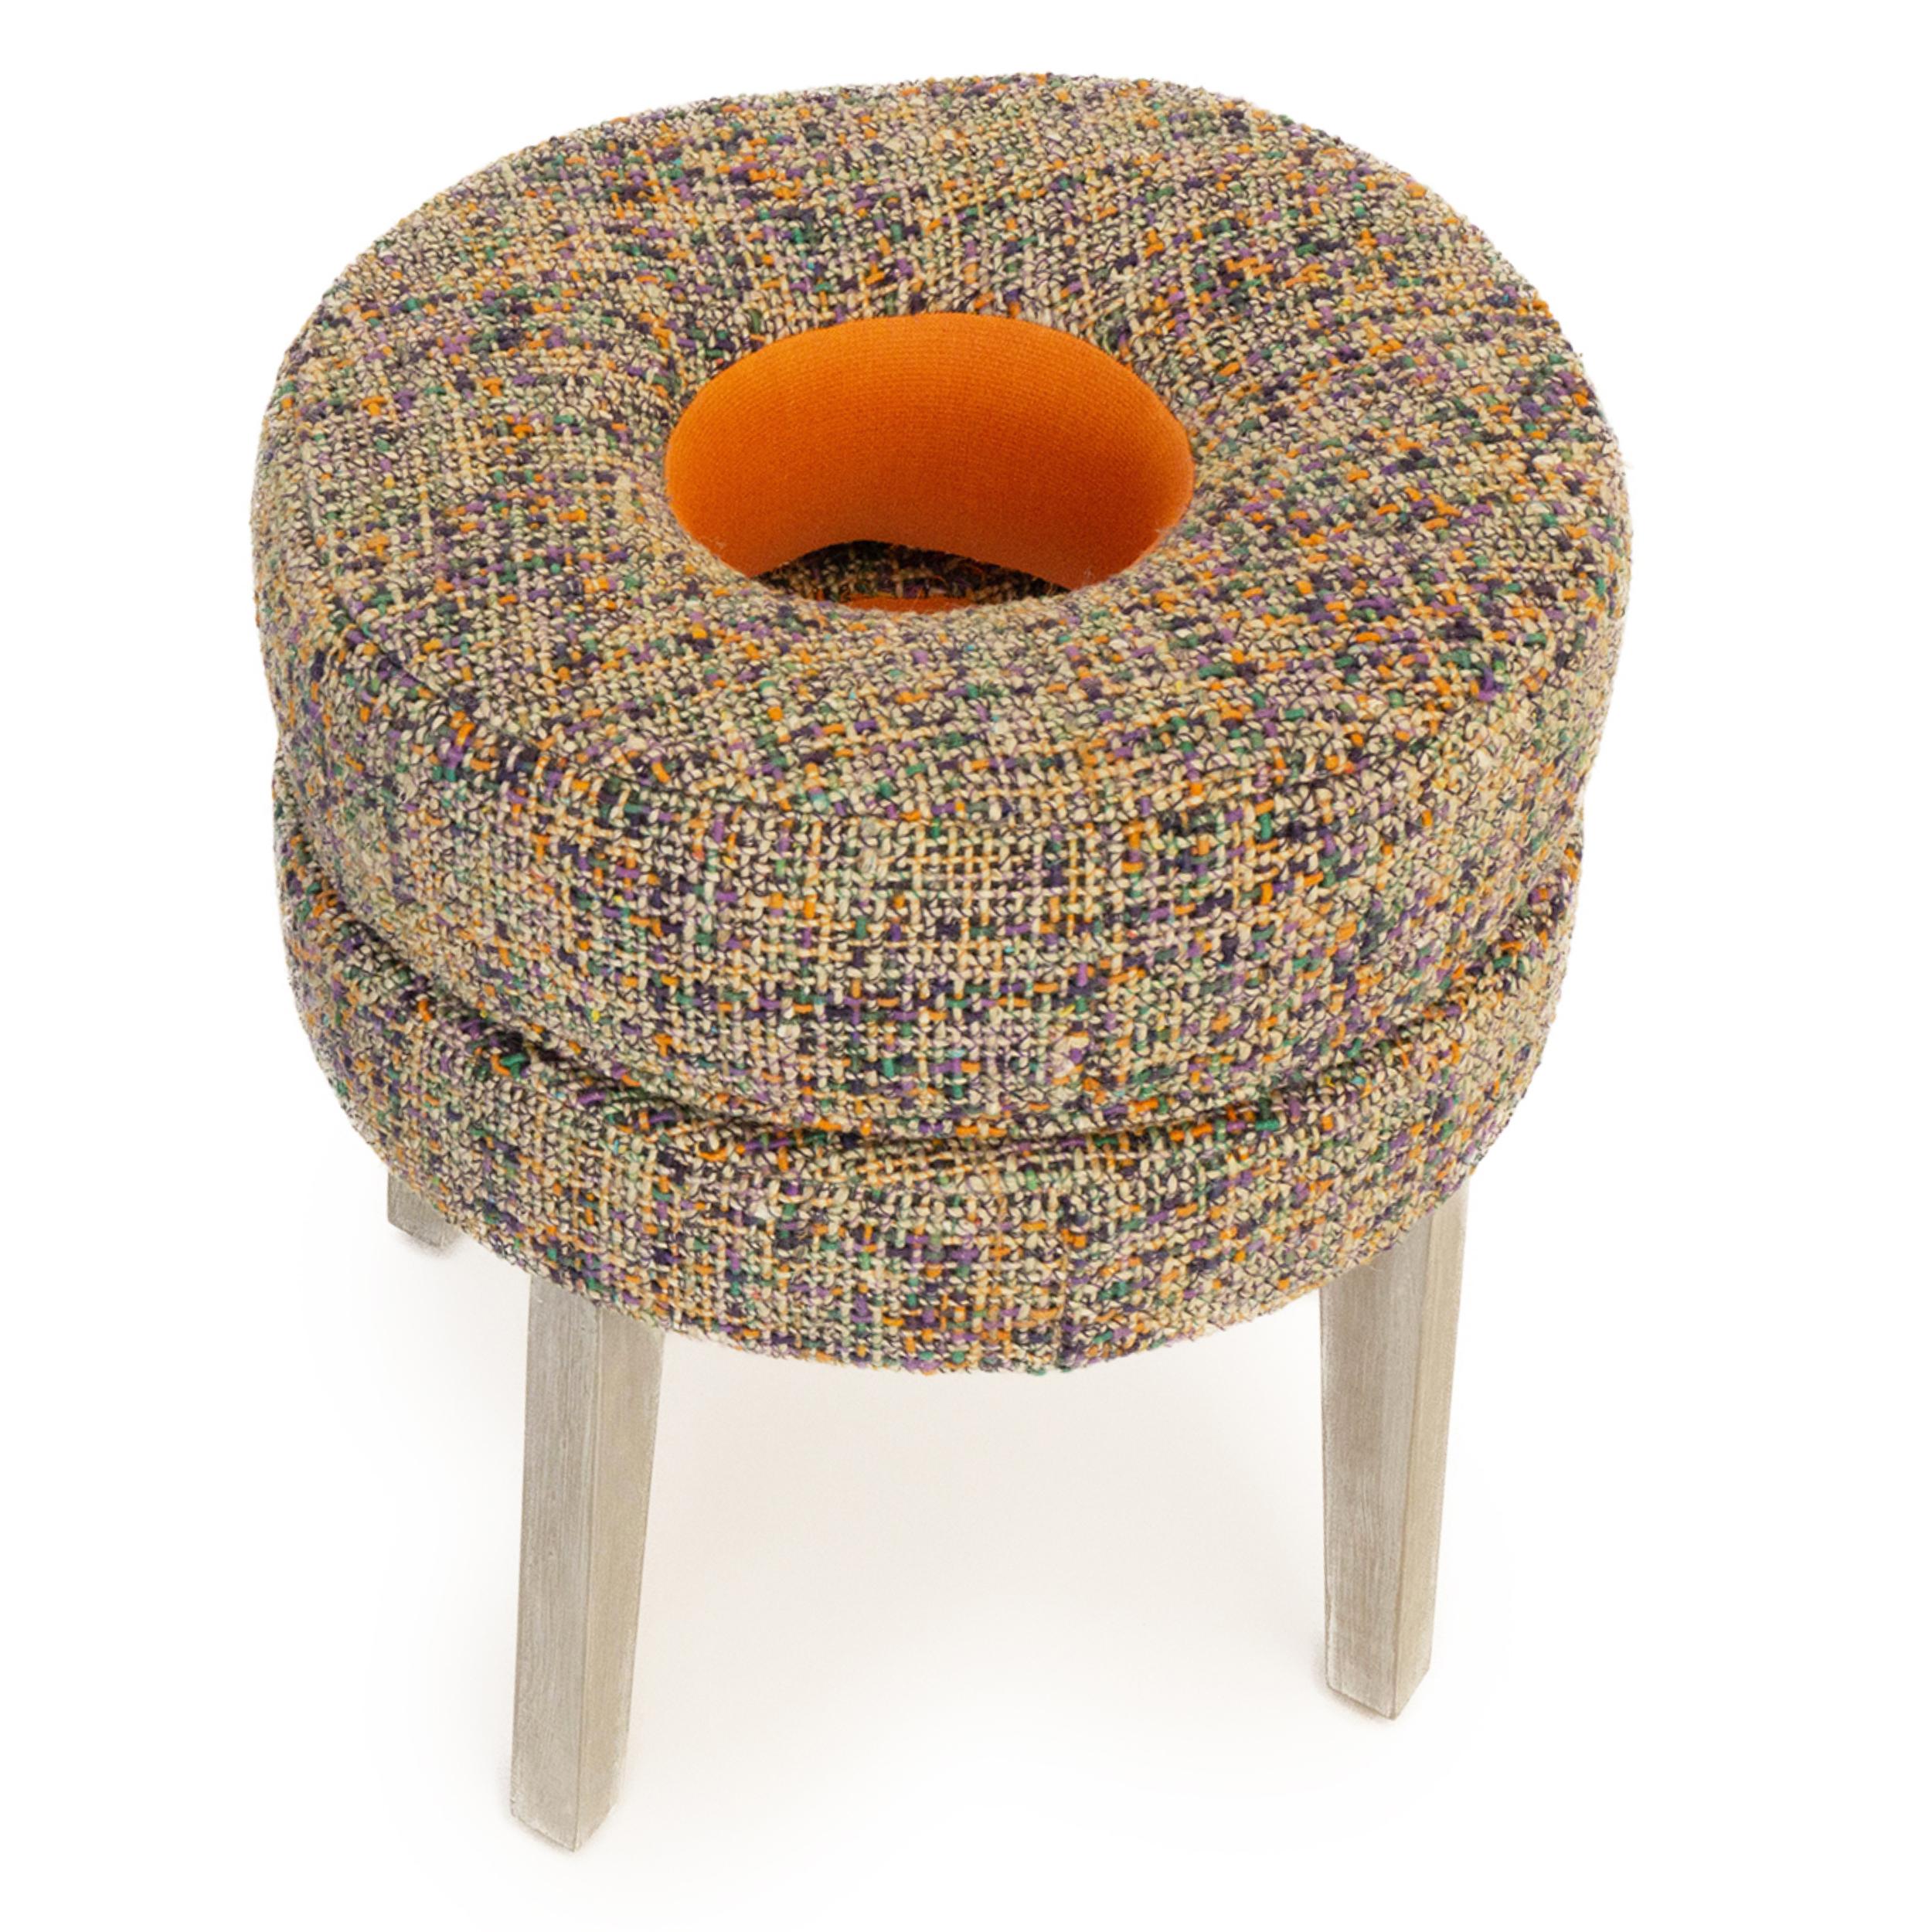 Post-Modern Small Round Stool with Tweed Upholstery & Orange Vinyl Accent For Sale